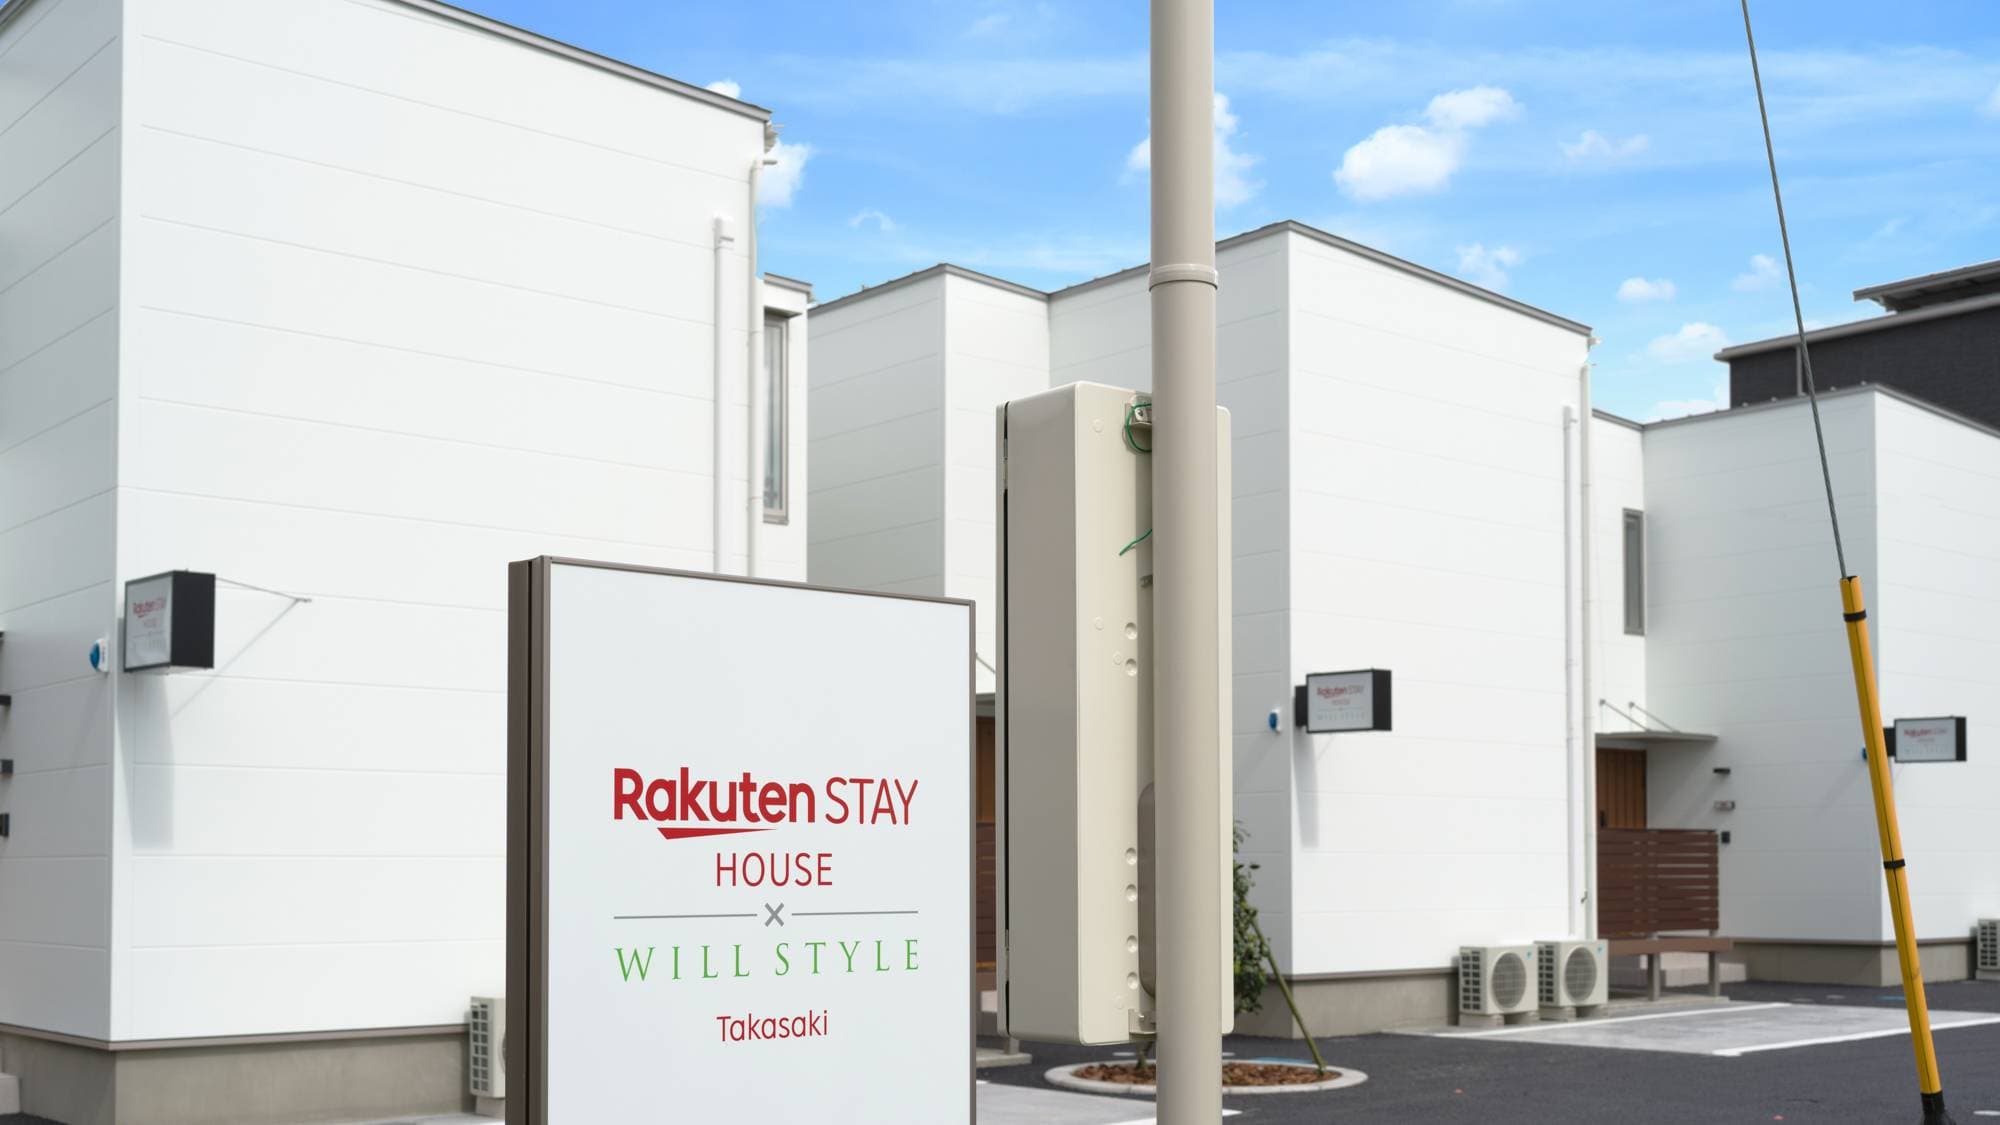 [Exterior] Please spend a relaxing time at the facilities provided by the Rakuten brand.